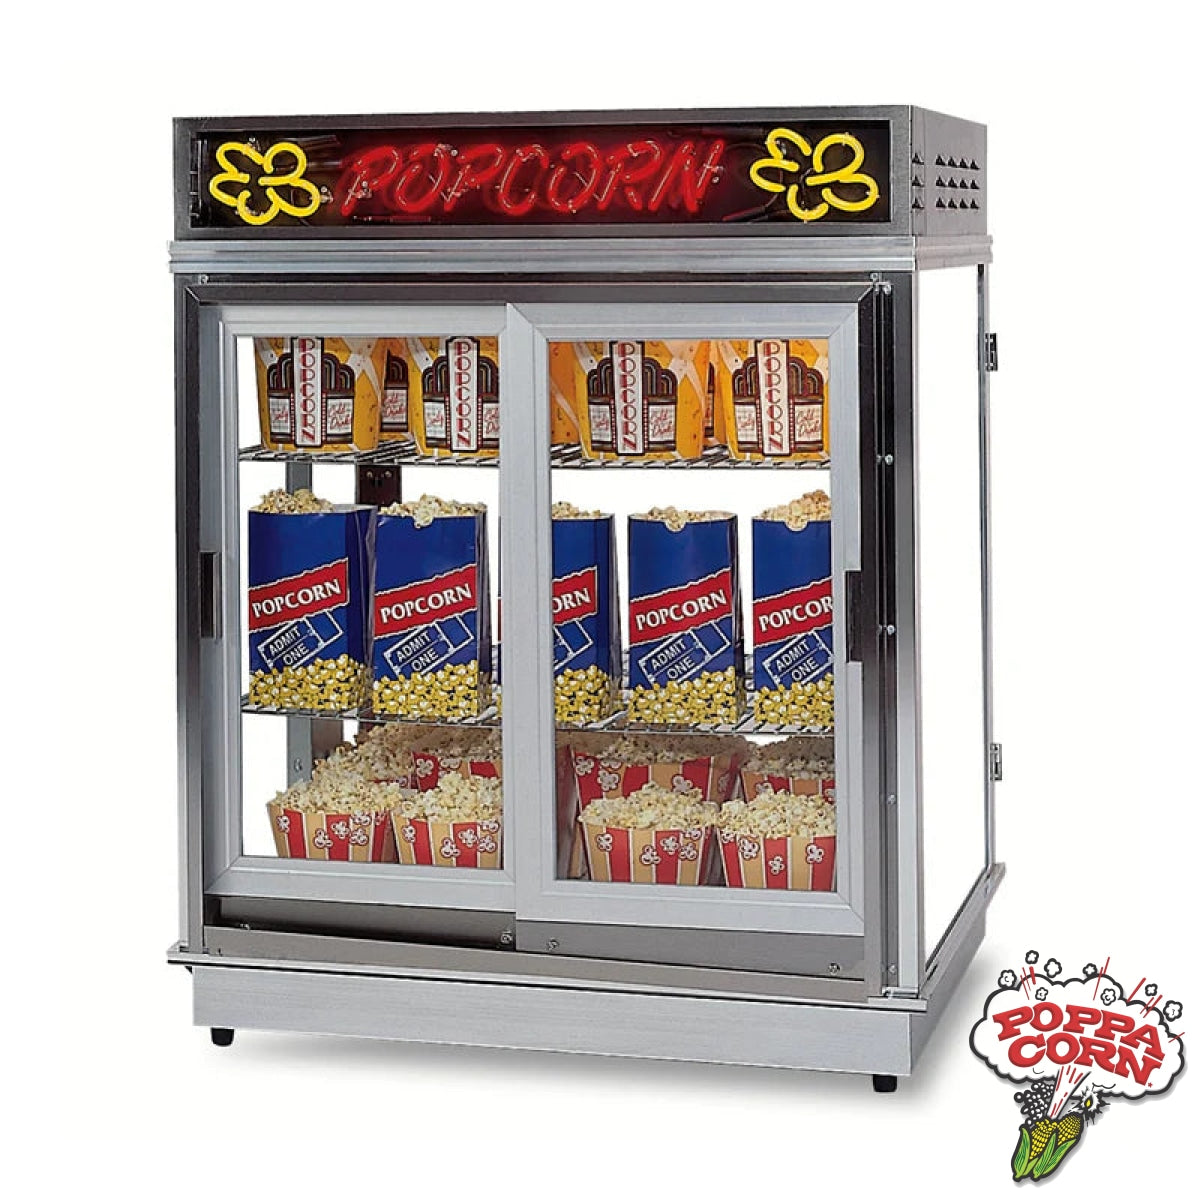 LED Neon Astro Staging Cabinet with Self-Serve Doors - Double Sliding Doors - GM2004SLDDN - Poppa Corn Corp